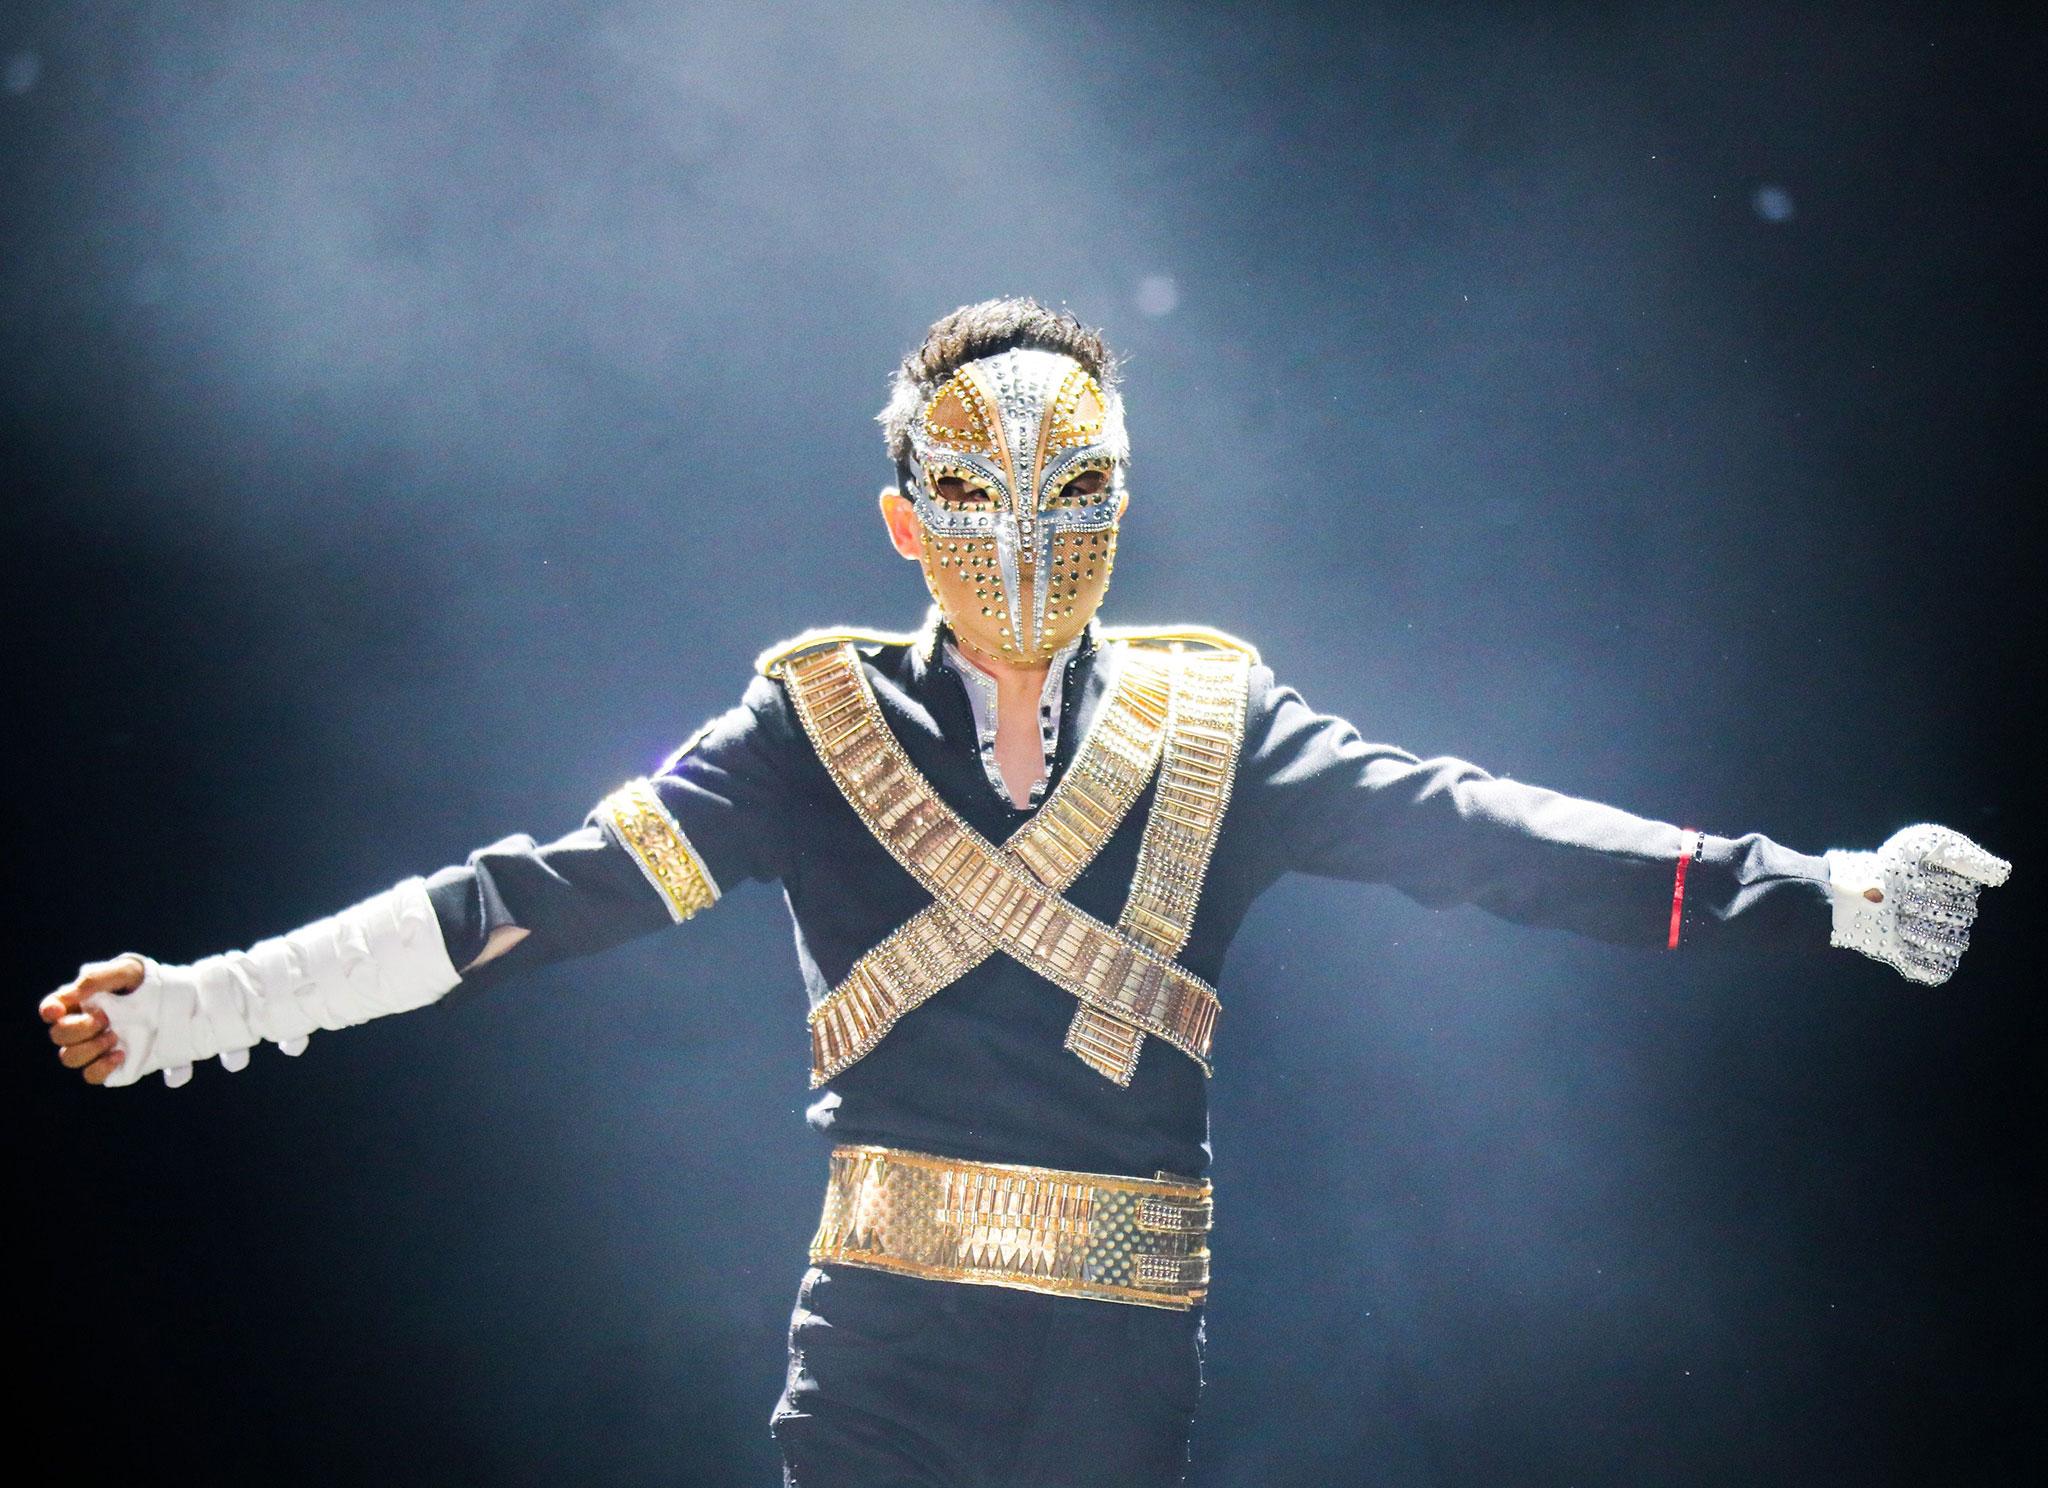 Alibaba founder Jack Ma appears on stage in a Michael Jackson outfit to celebrate his company's birthday